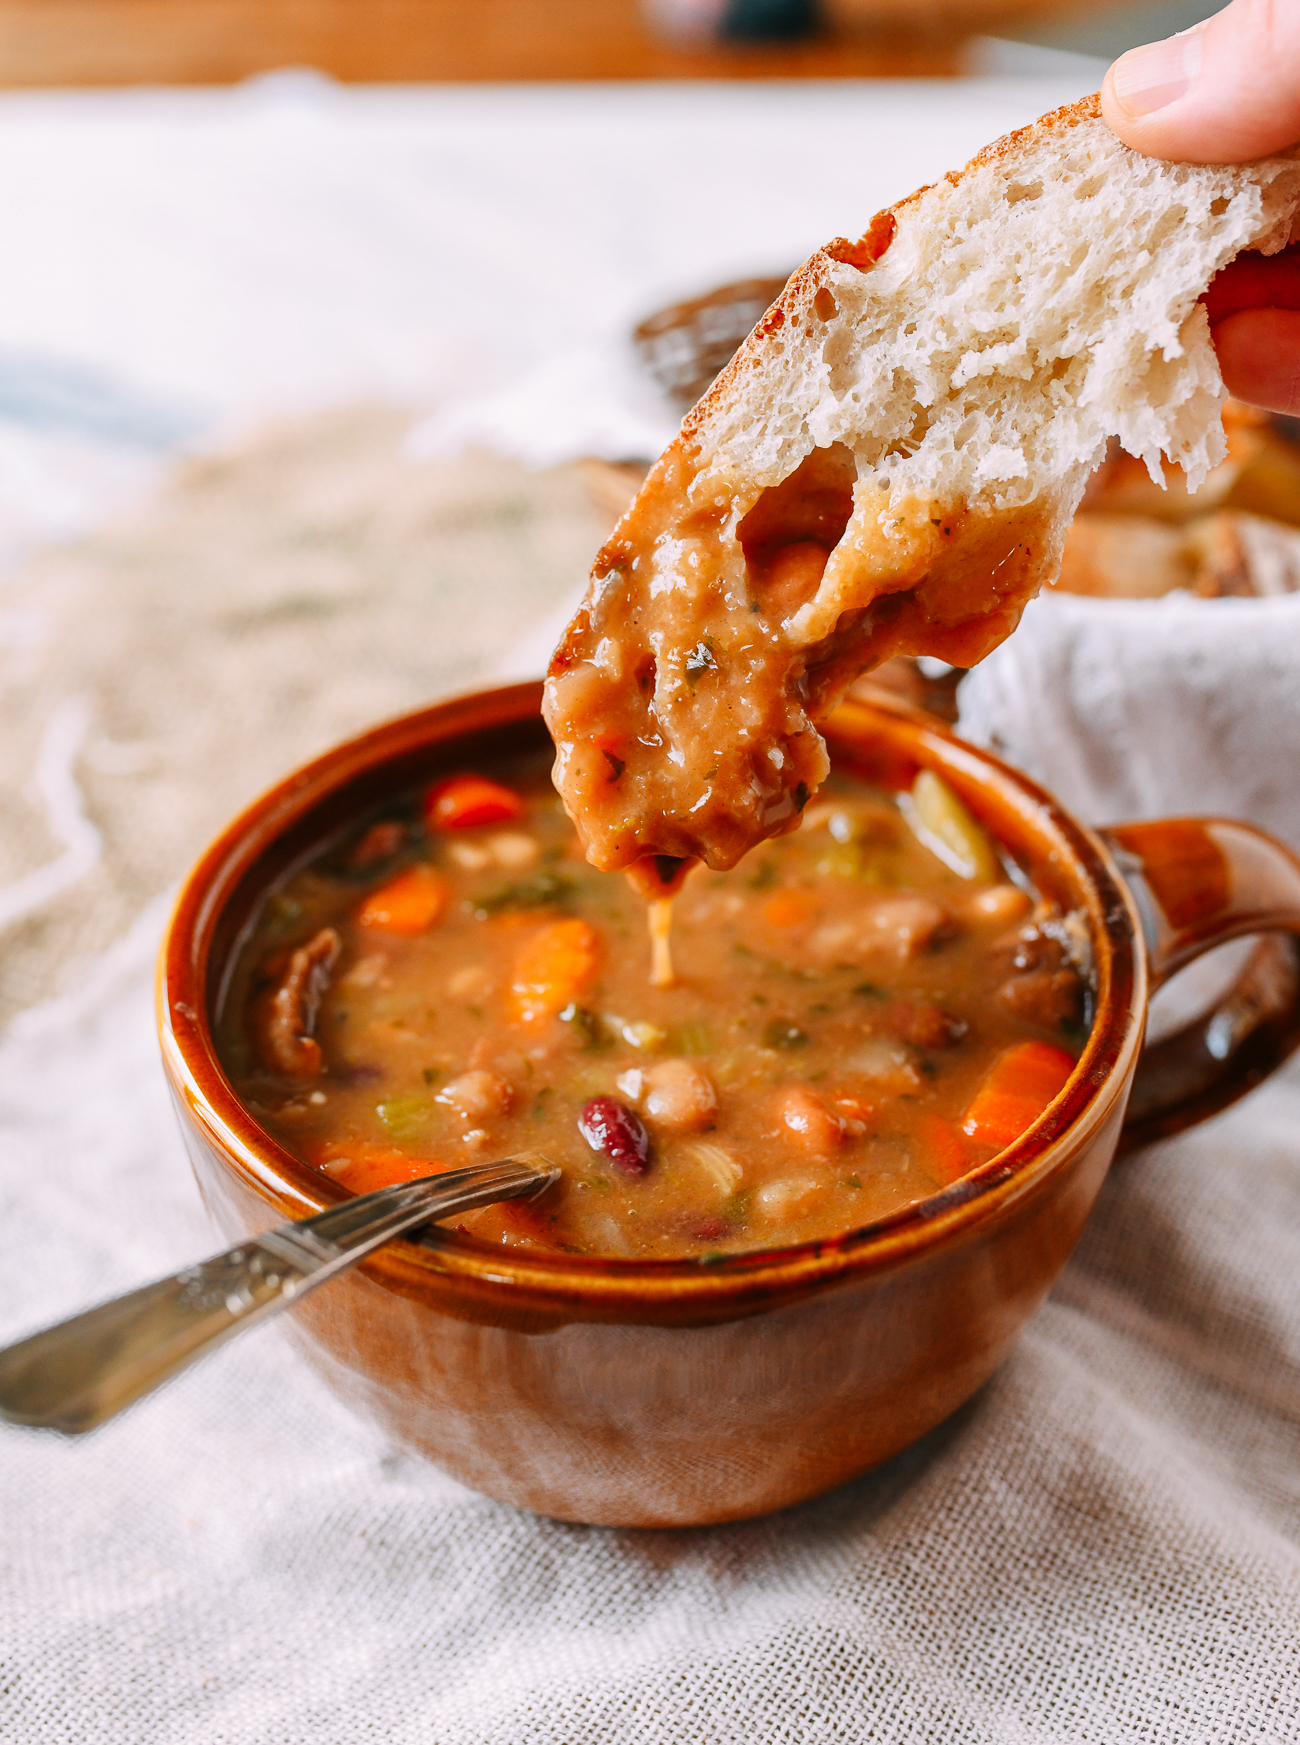 Dipping bread into ham and bean soup